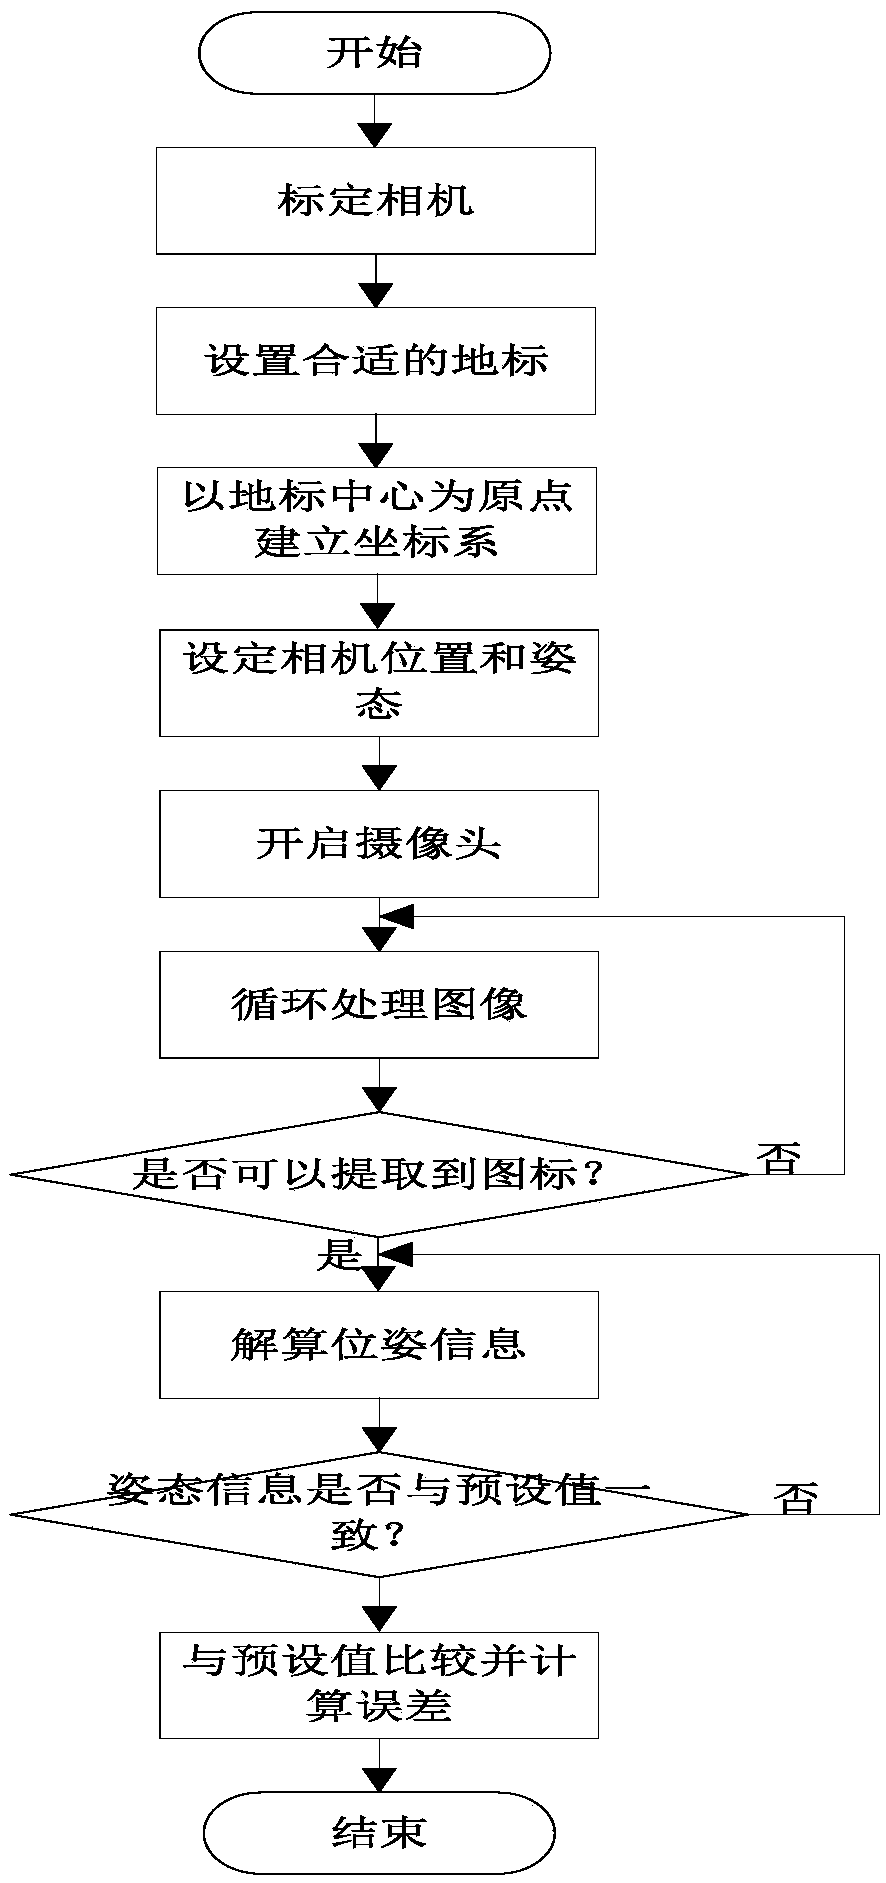 Unmanned aerial vehicle positioning method based on a cooperative two-dimensional code of a virtual simulation environment